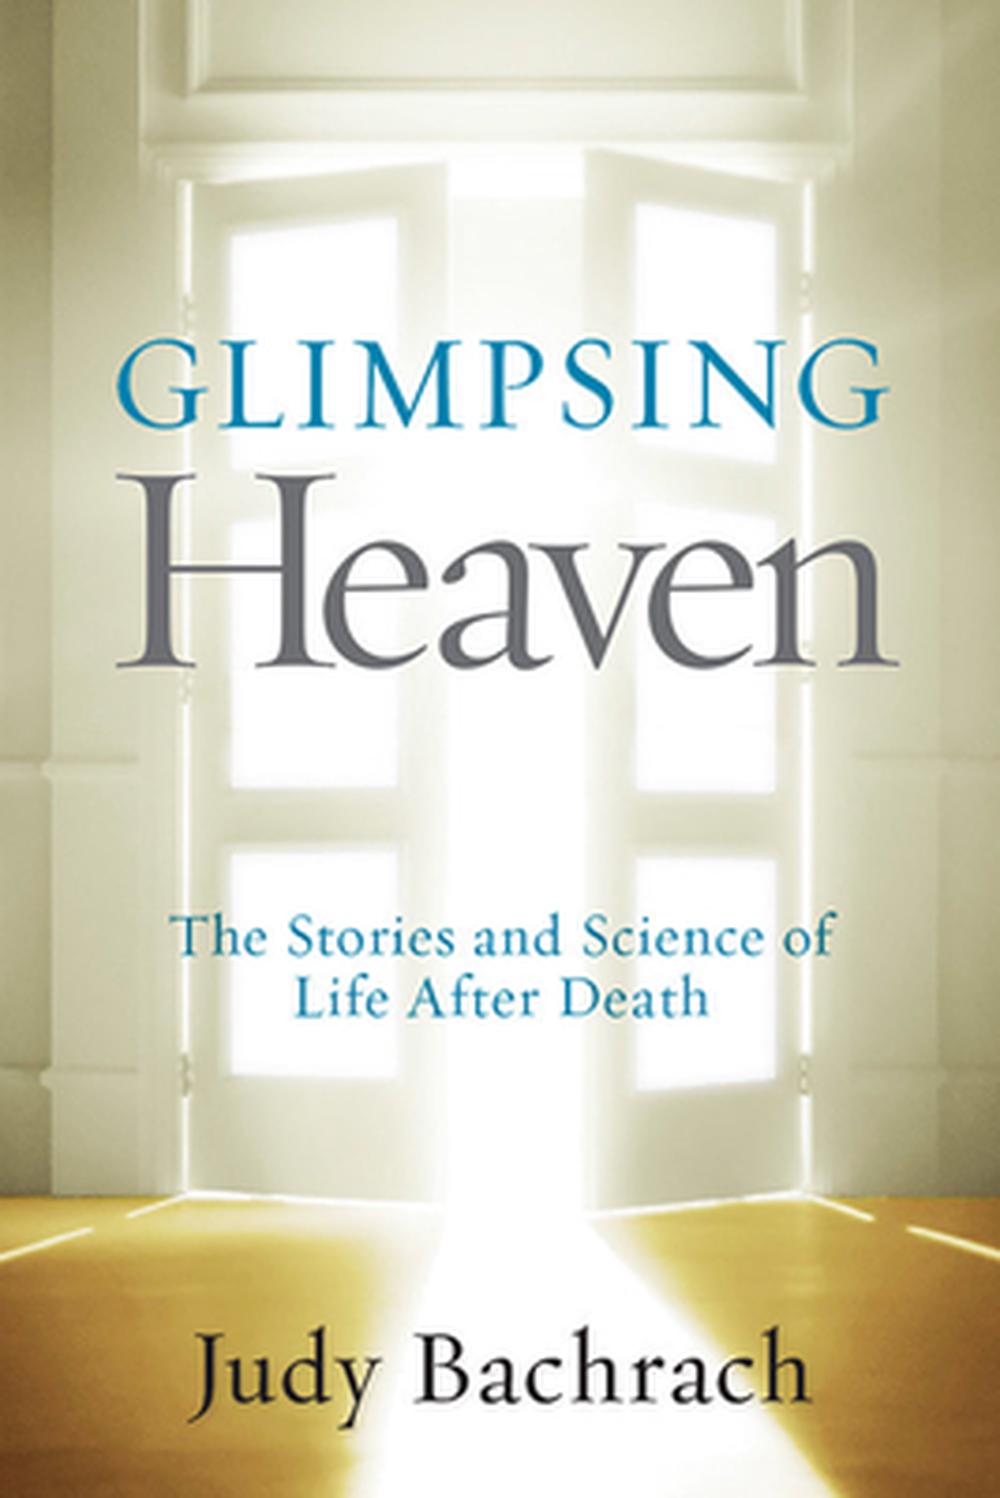 Glimpsing Heaven The Stories and Science of Life After Death by Judy Bachrach, Hardcover